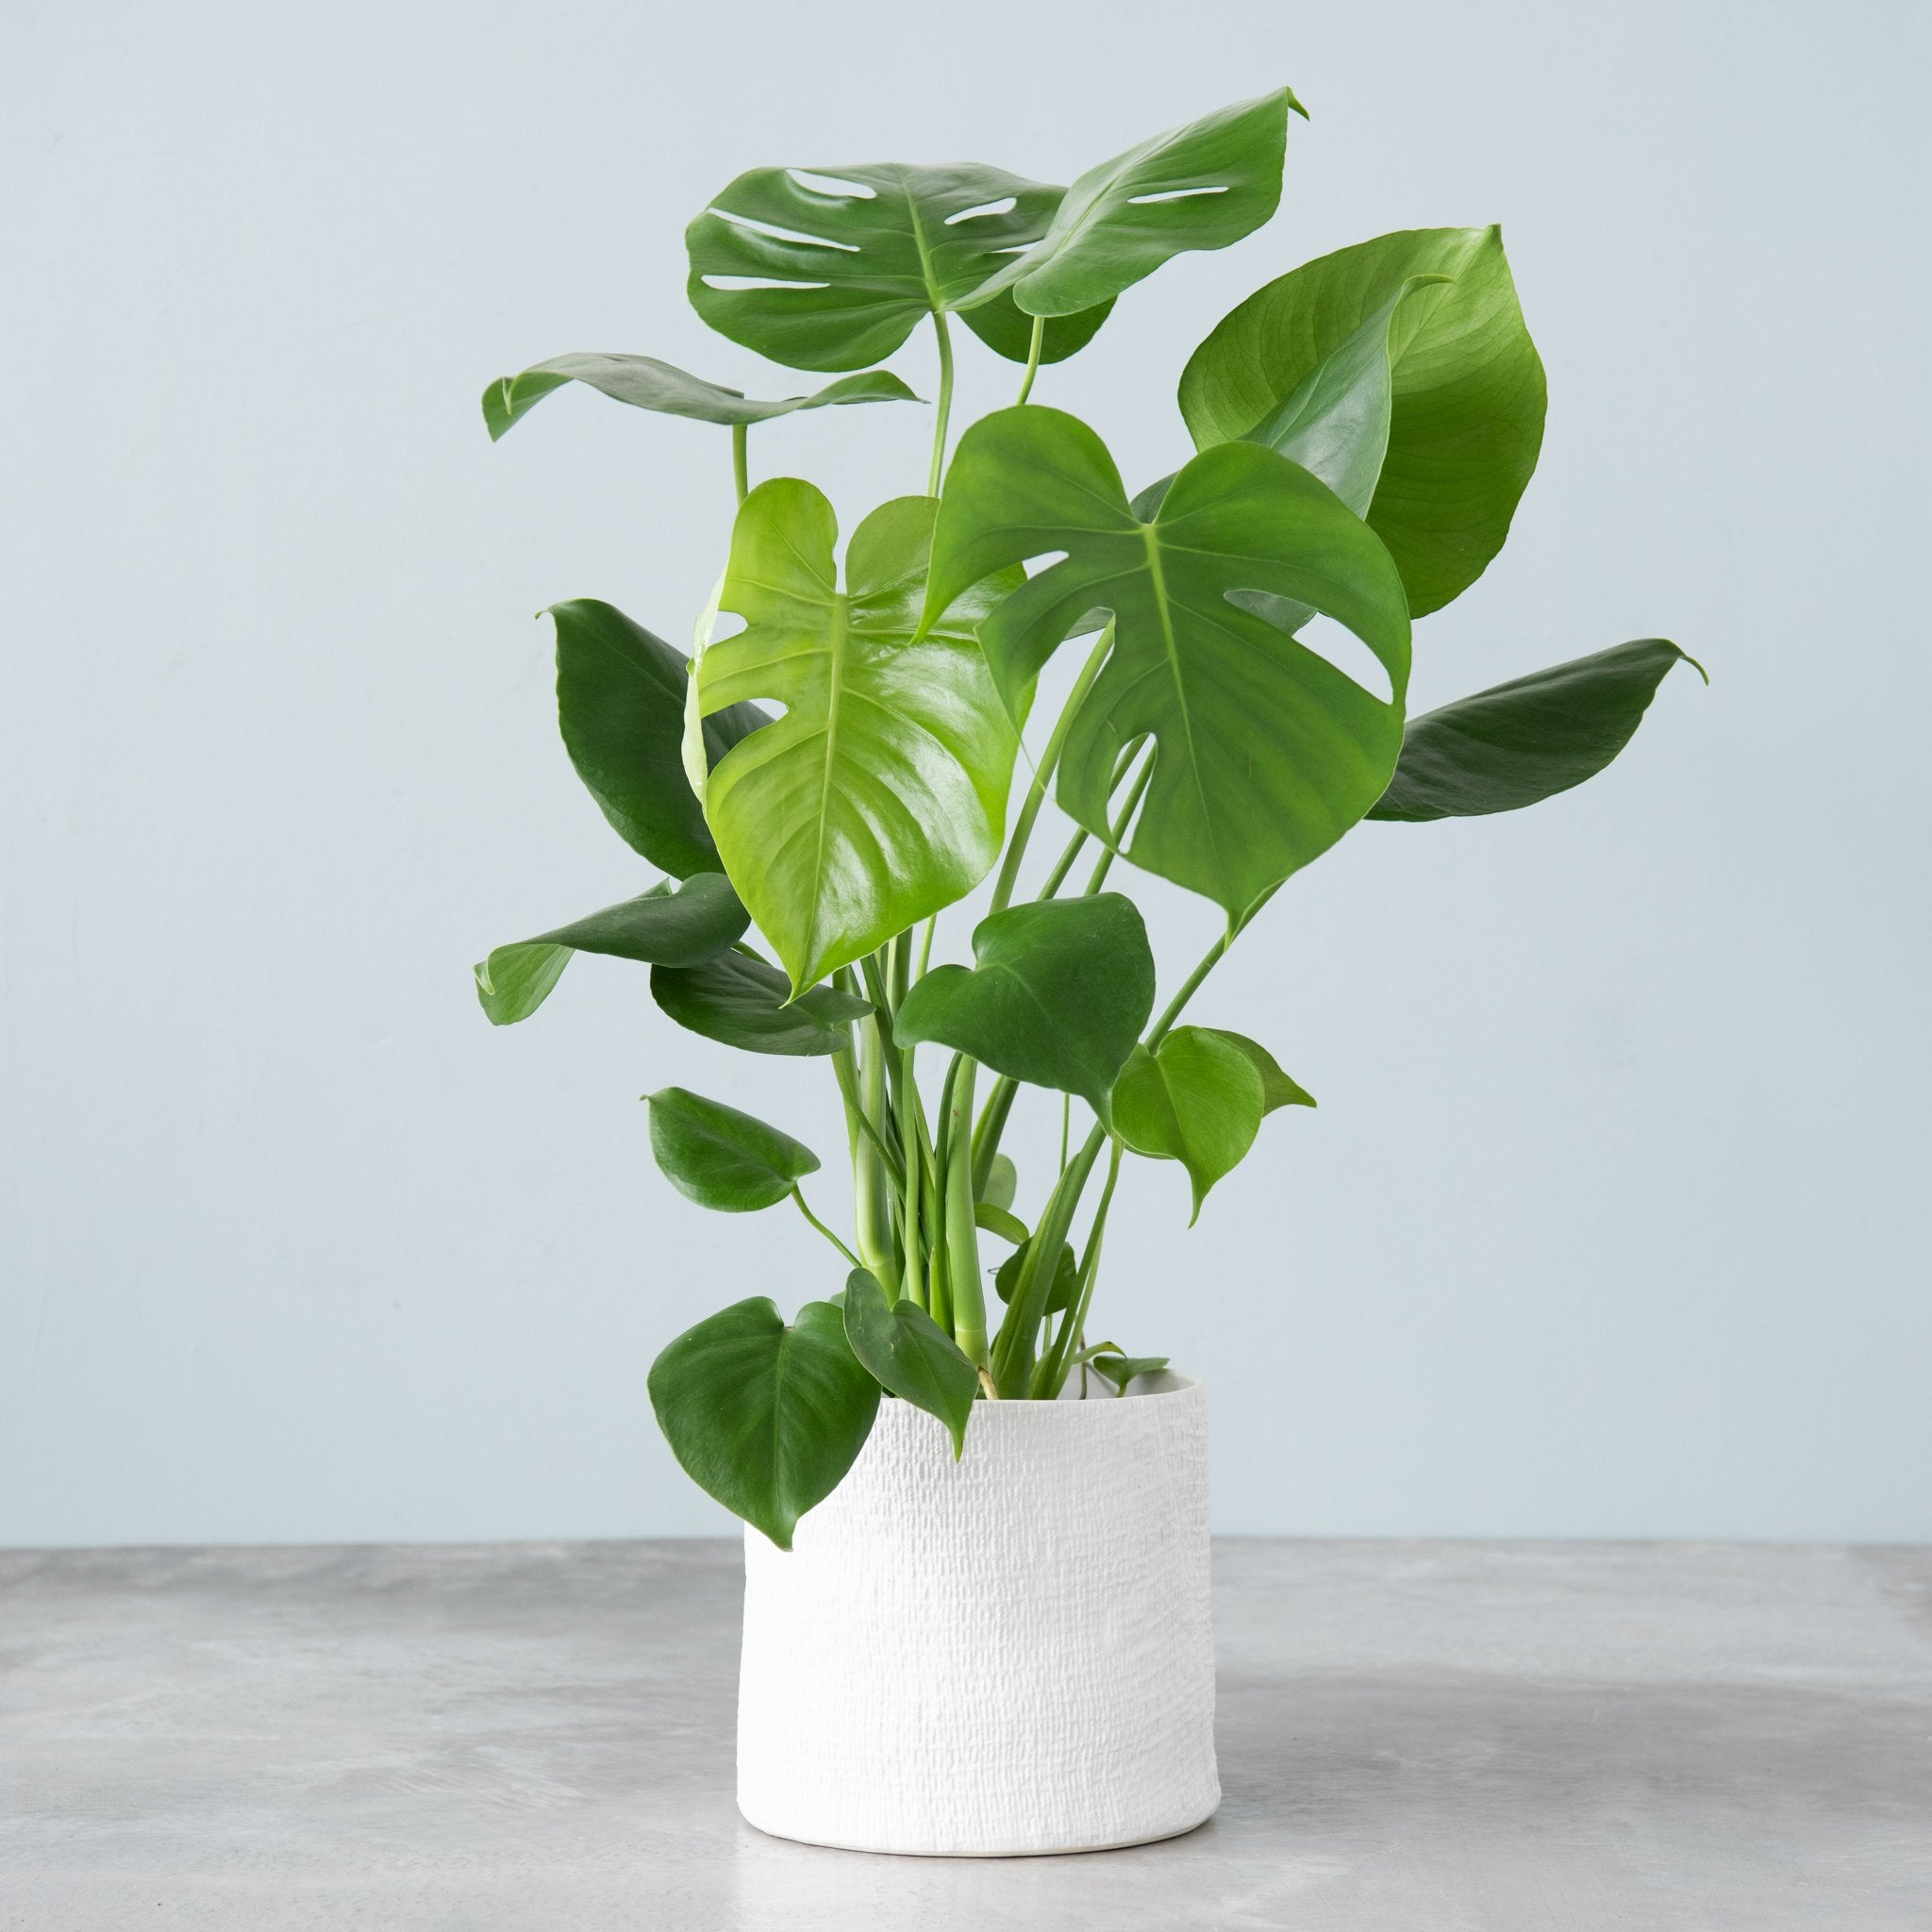 Monstera Deliciosa Plant  A.K.A. Swiss Cheese Plant - PlantingTree